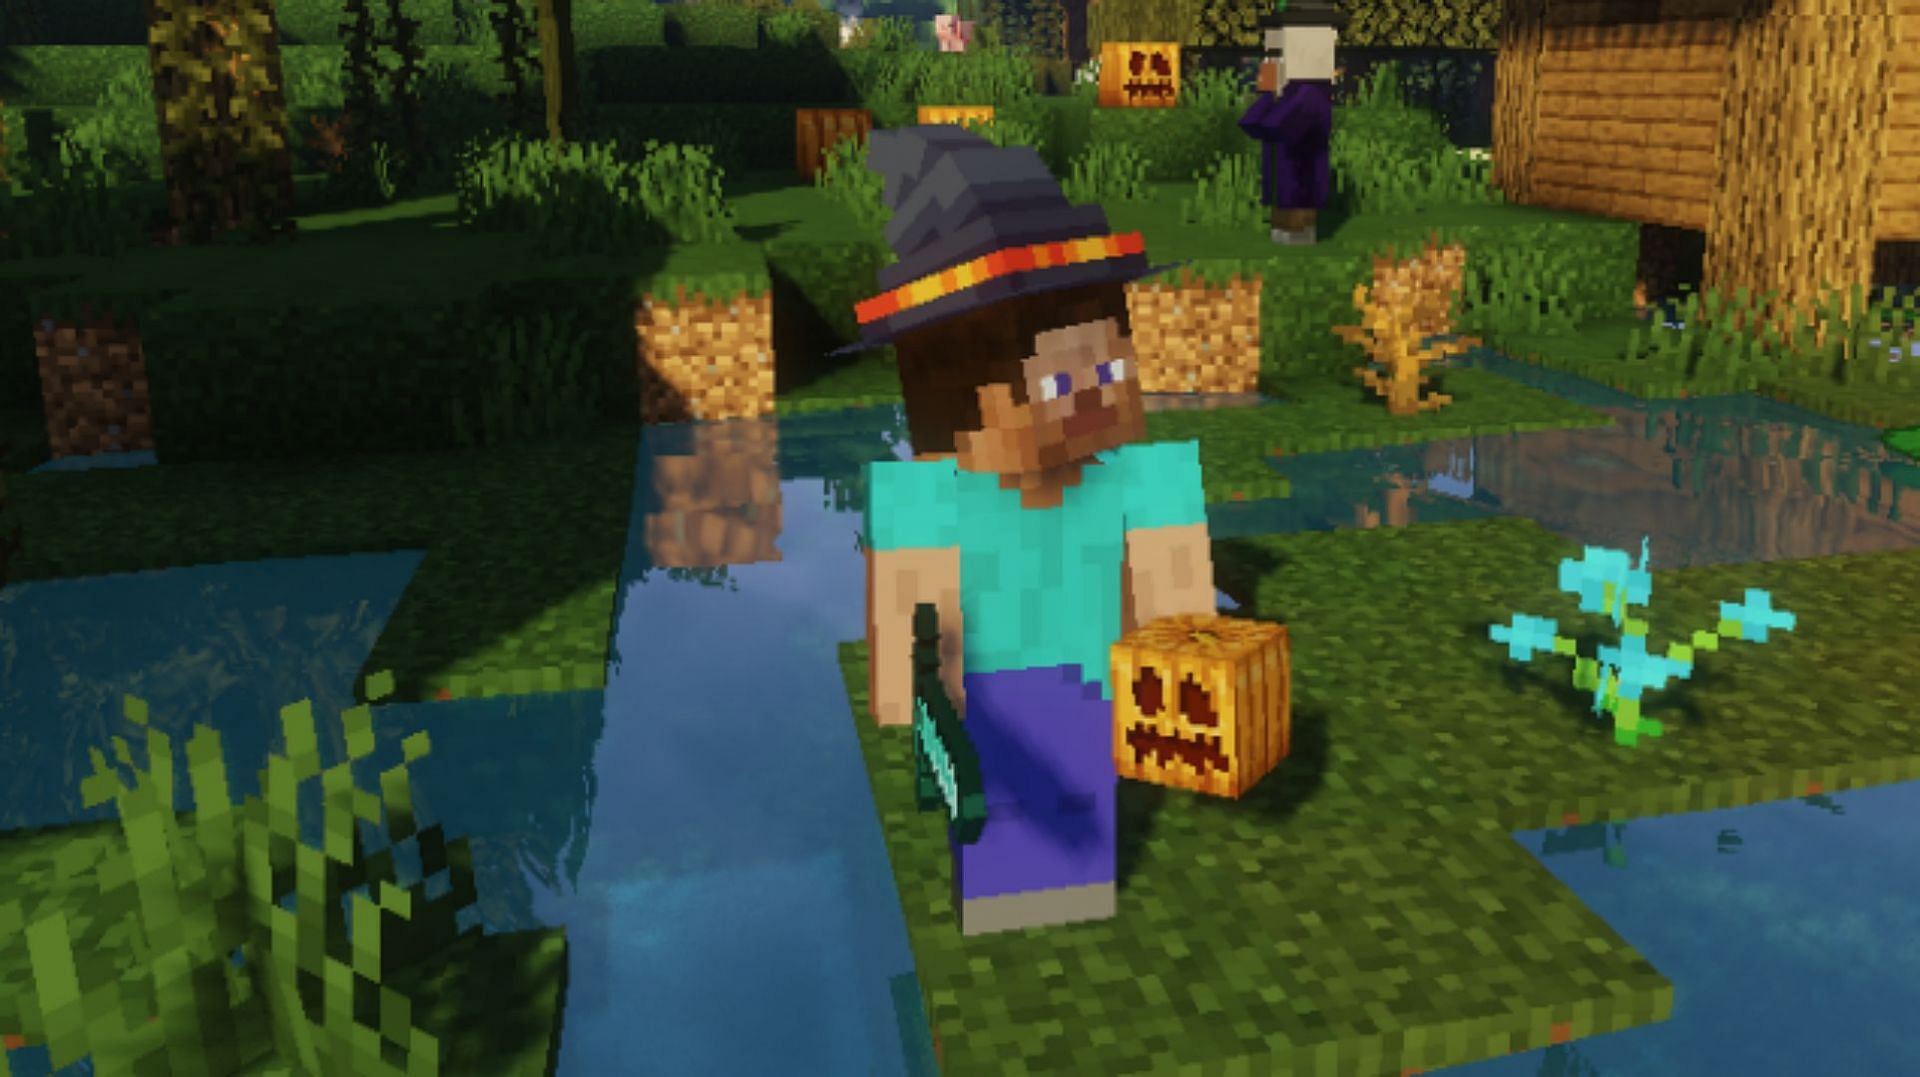 OptiFine handing out special Minecraft skin cosmetic during Halloween (Image via X/OptiFine)